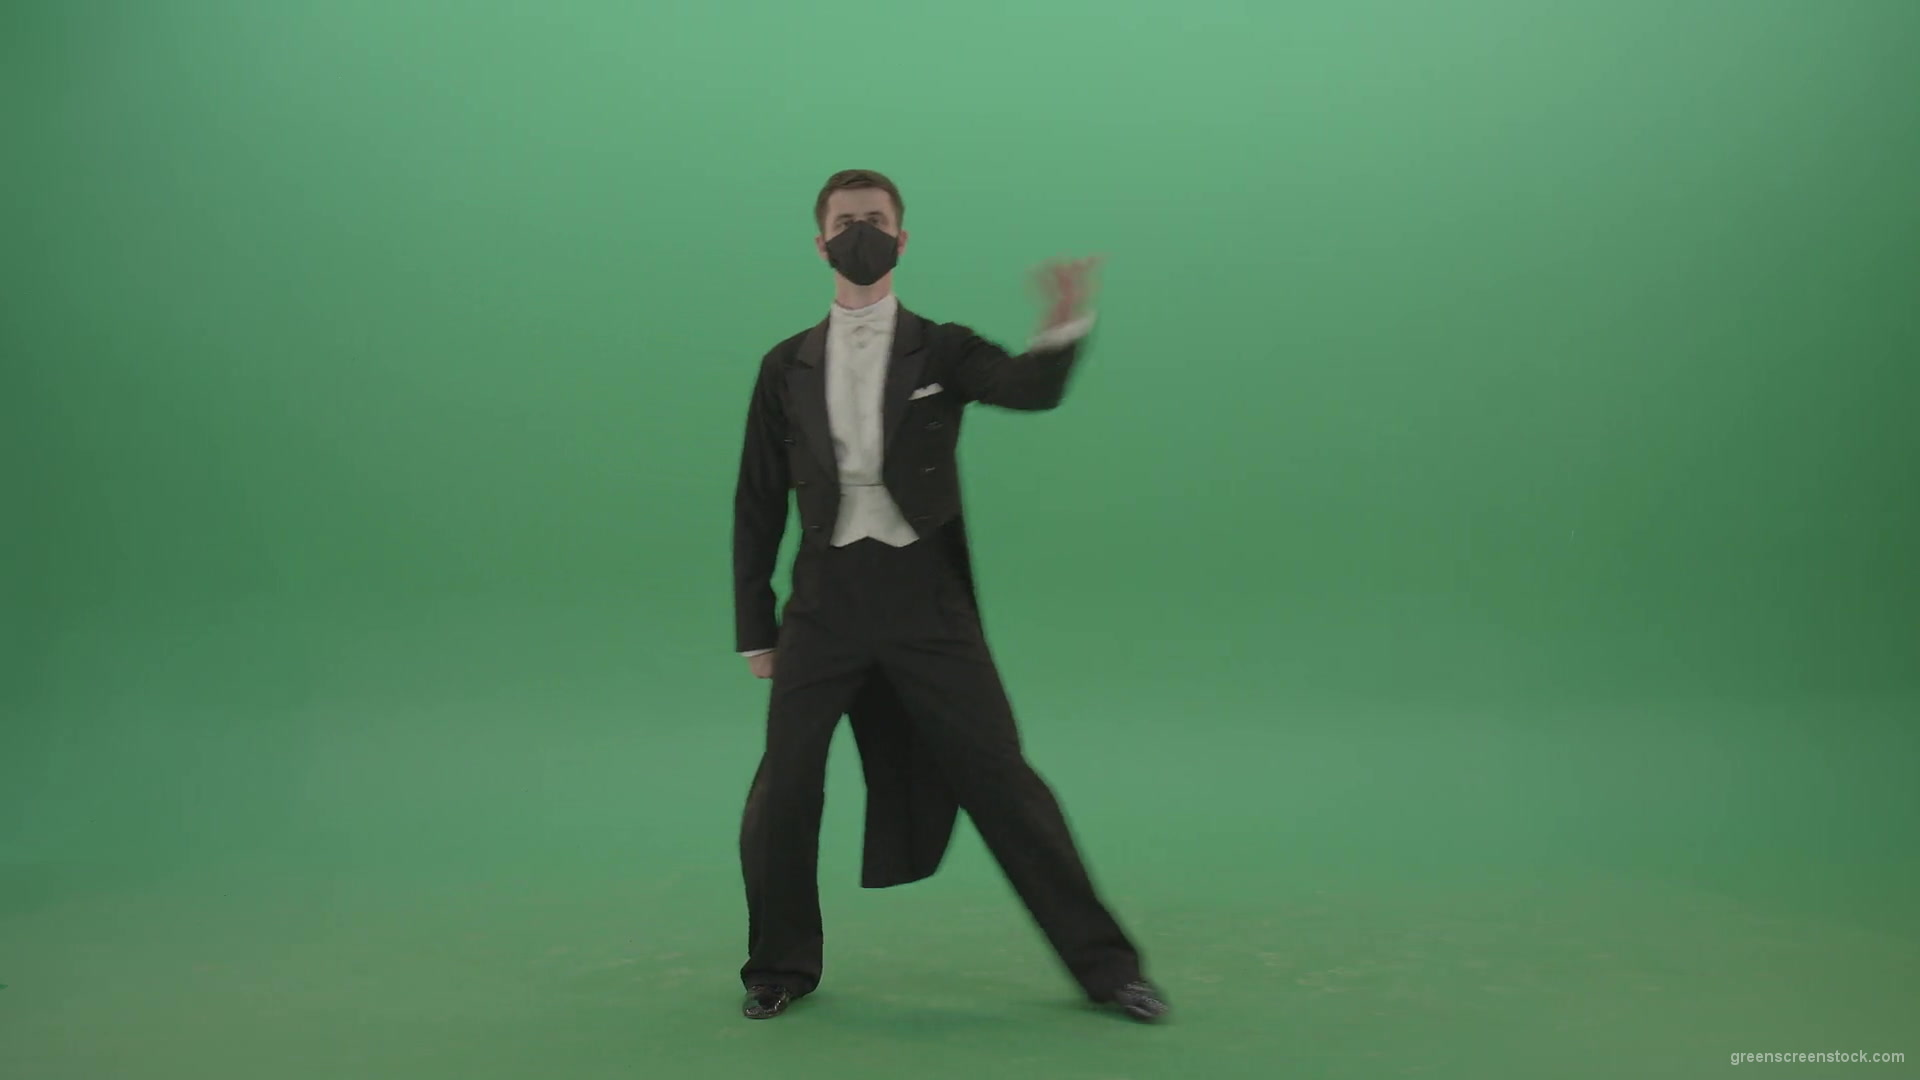 Man-in-Classical-ballroom-suite-making-wish-regards-to-impres-audience-in-black-medicine-mask-on-green-screen-4K-Video-Footage-1920_006 Green Screen Stock